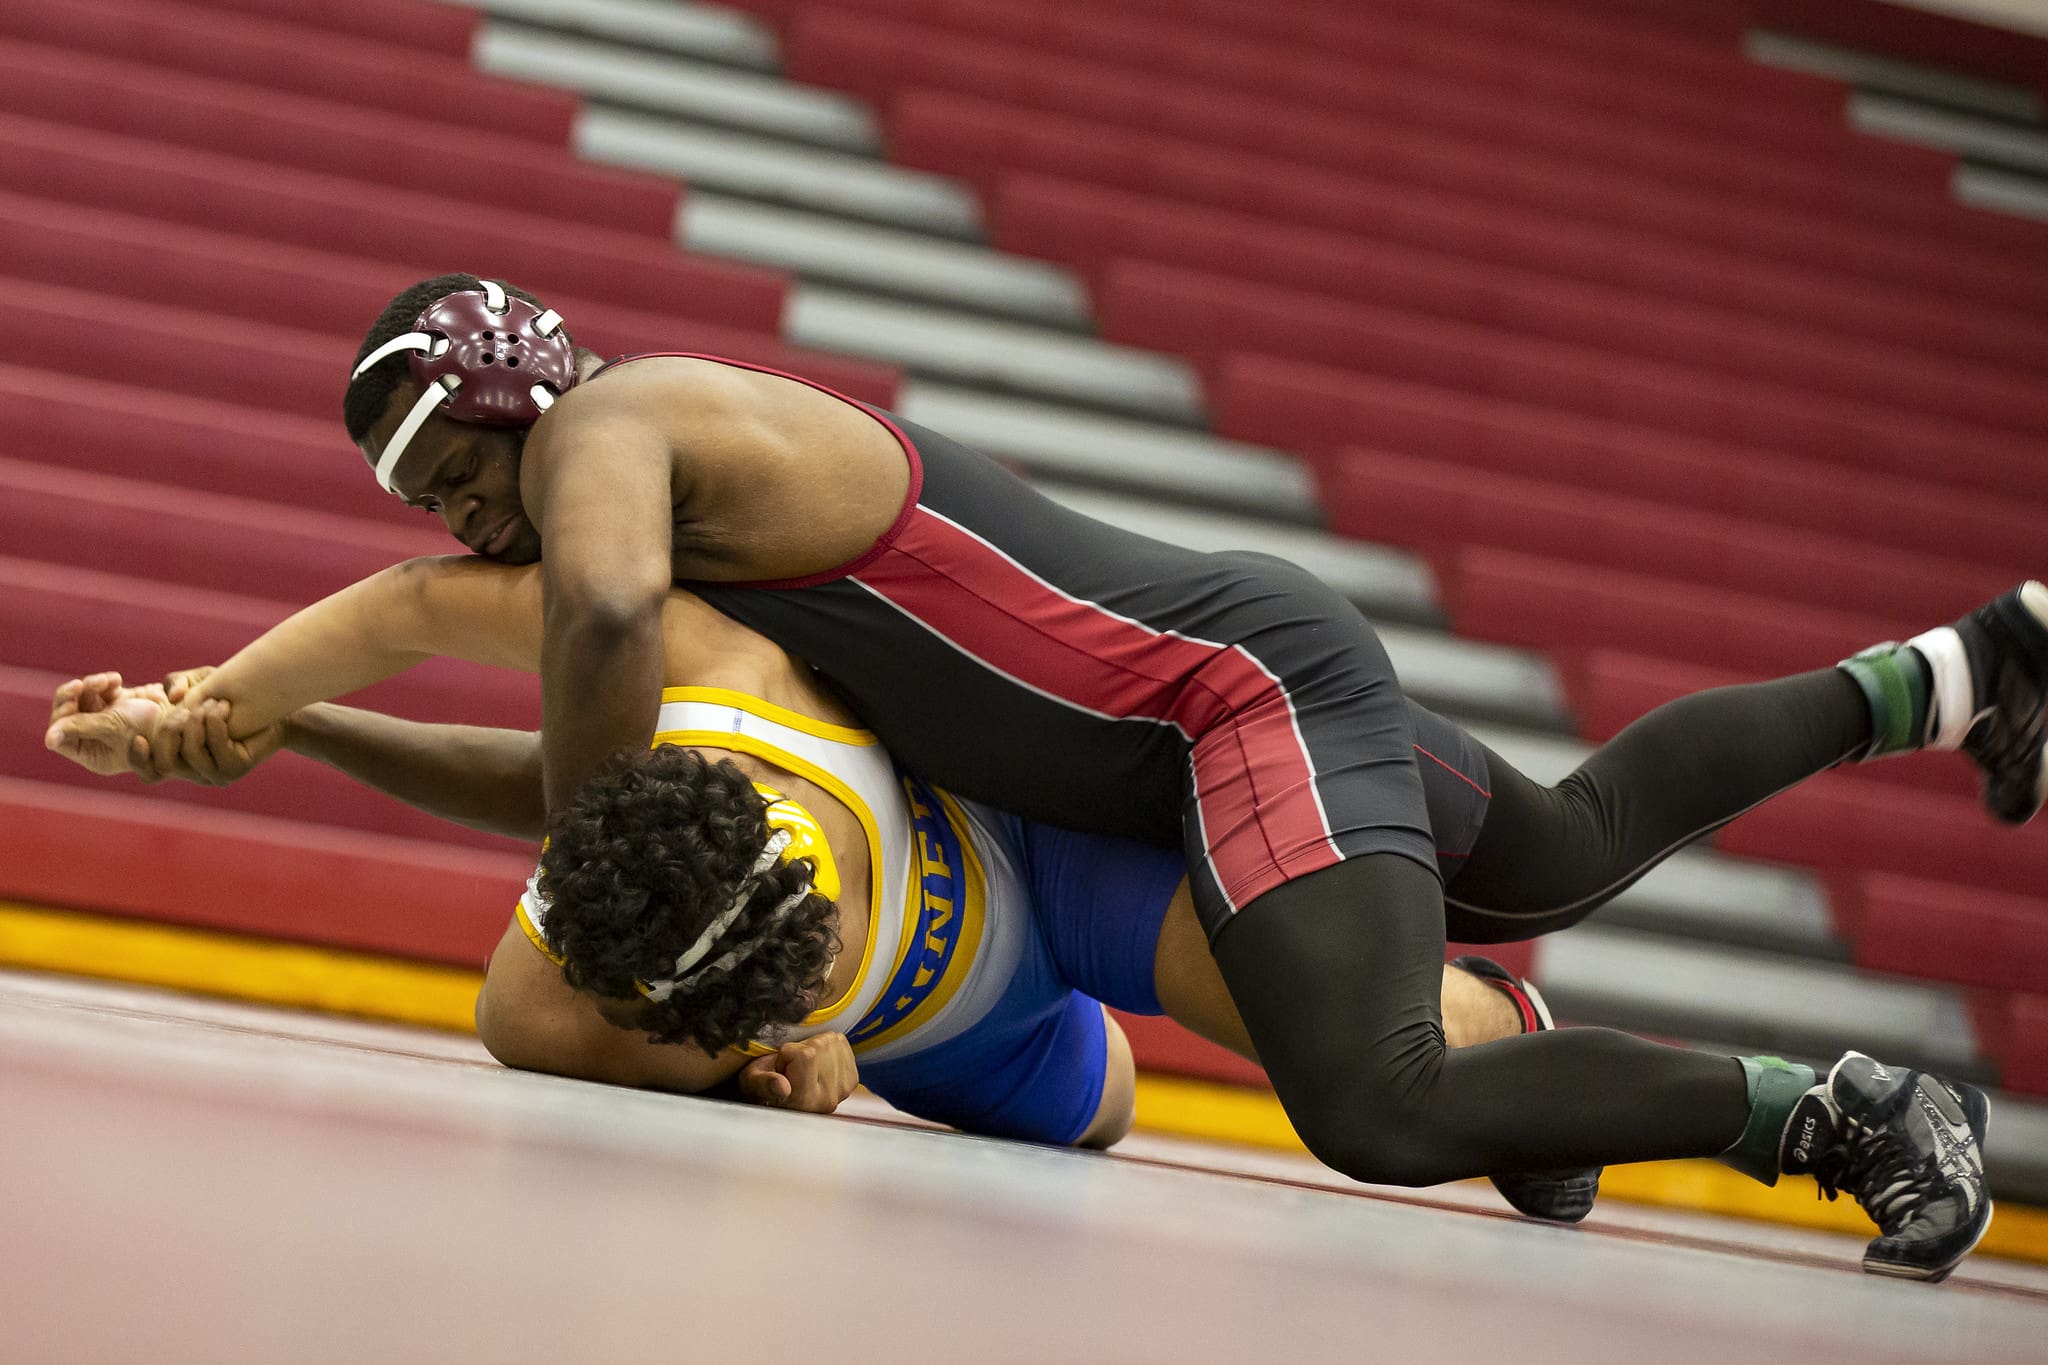 Two students at a wrestling match